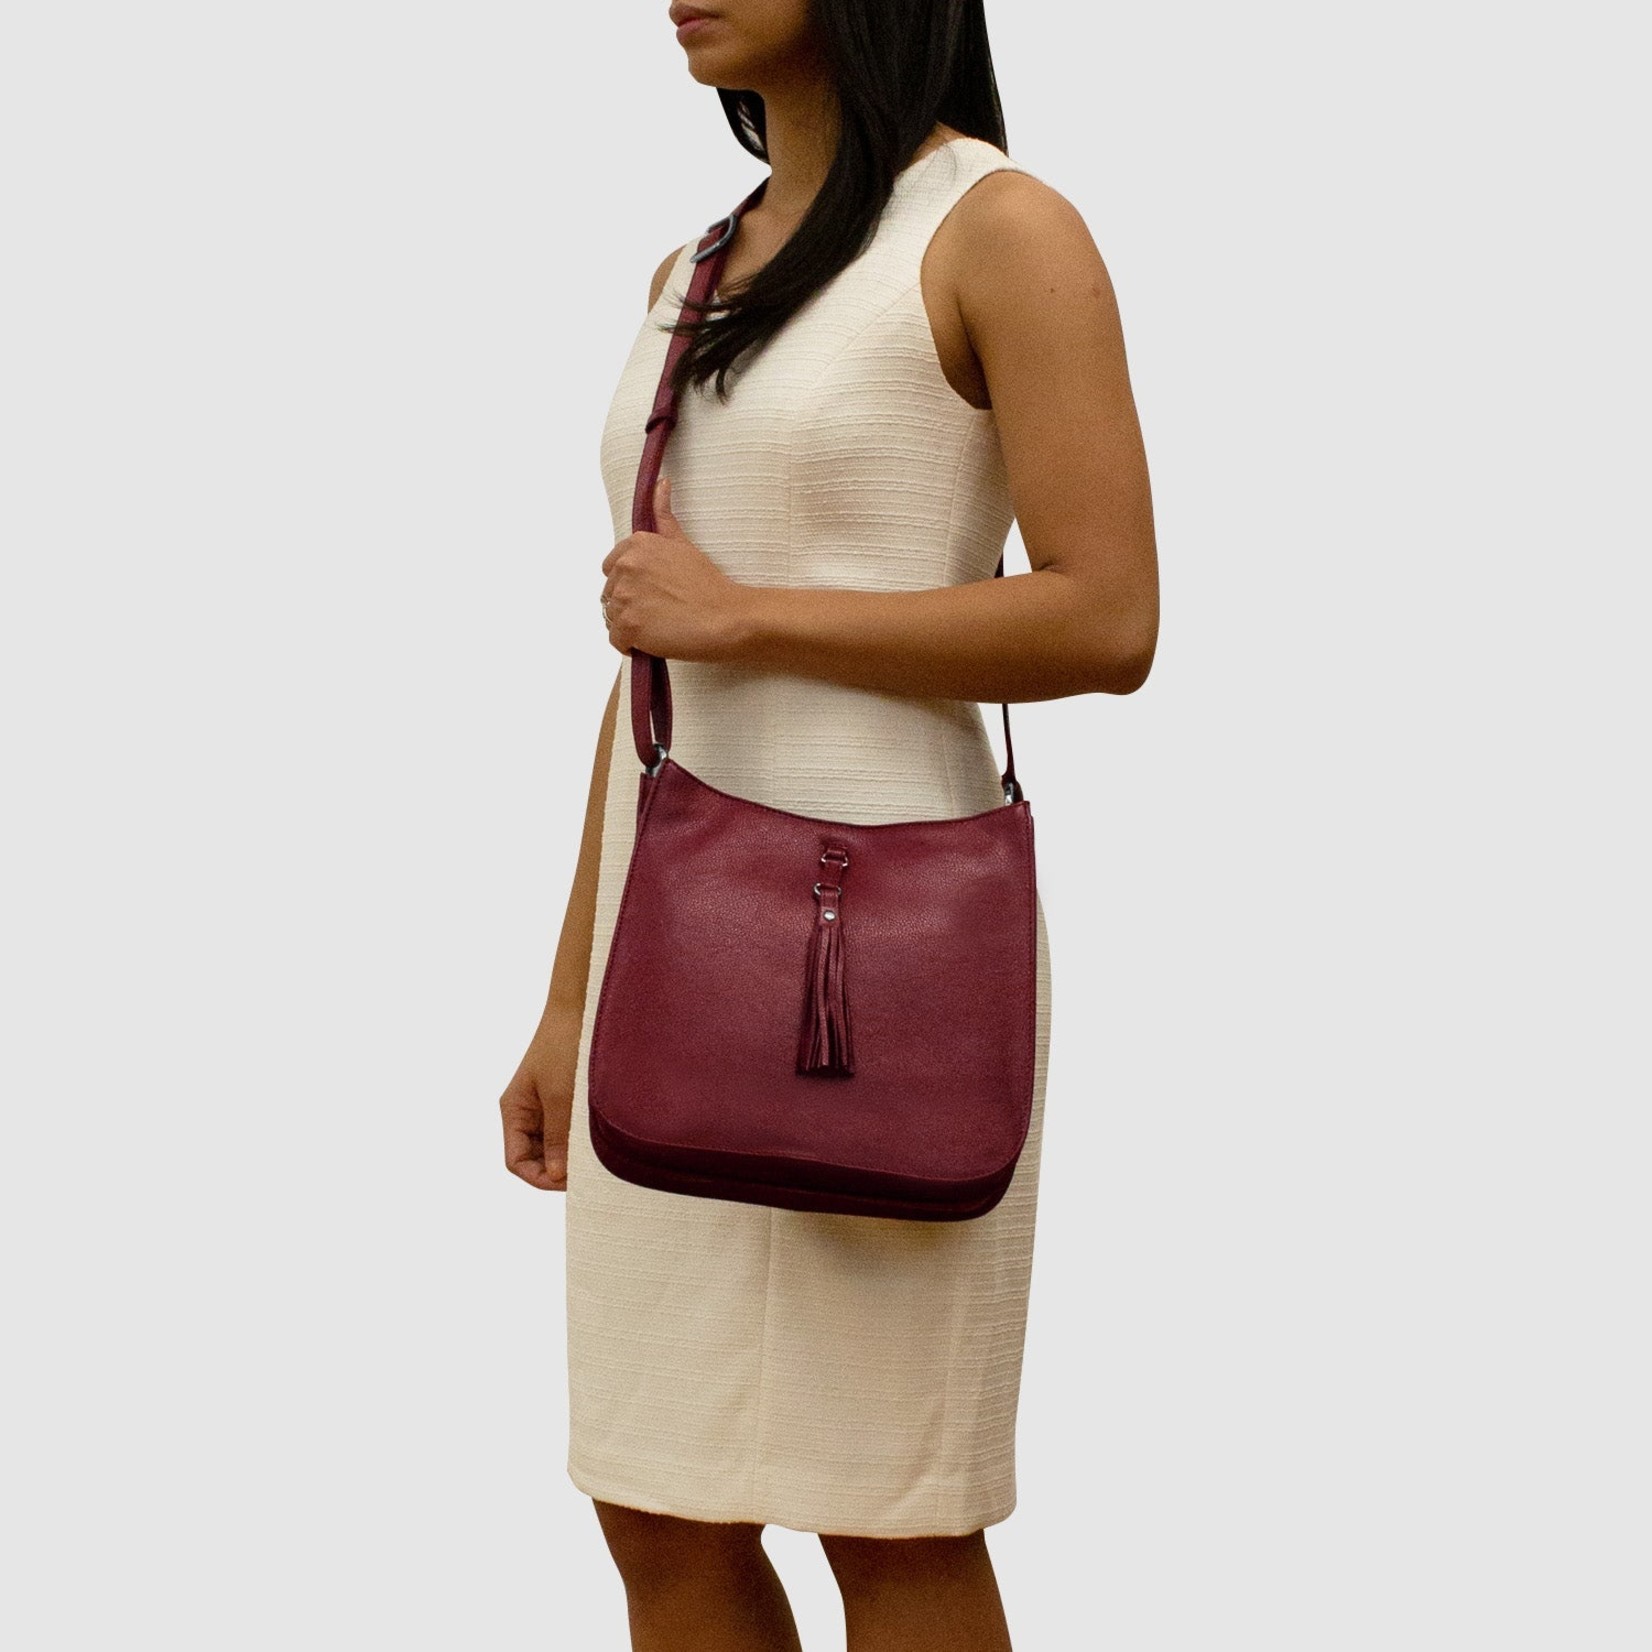 Leather Handbags and Accessories 6888 Taupe - Feed Bag with Tassel